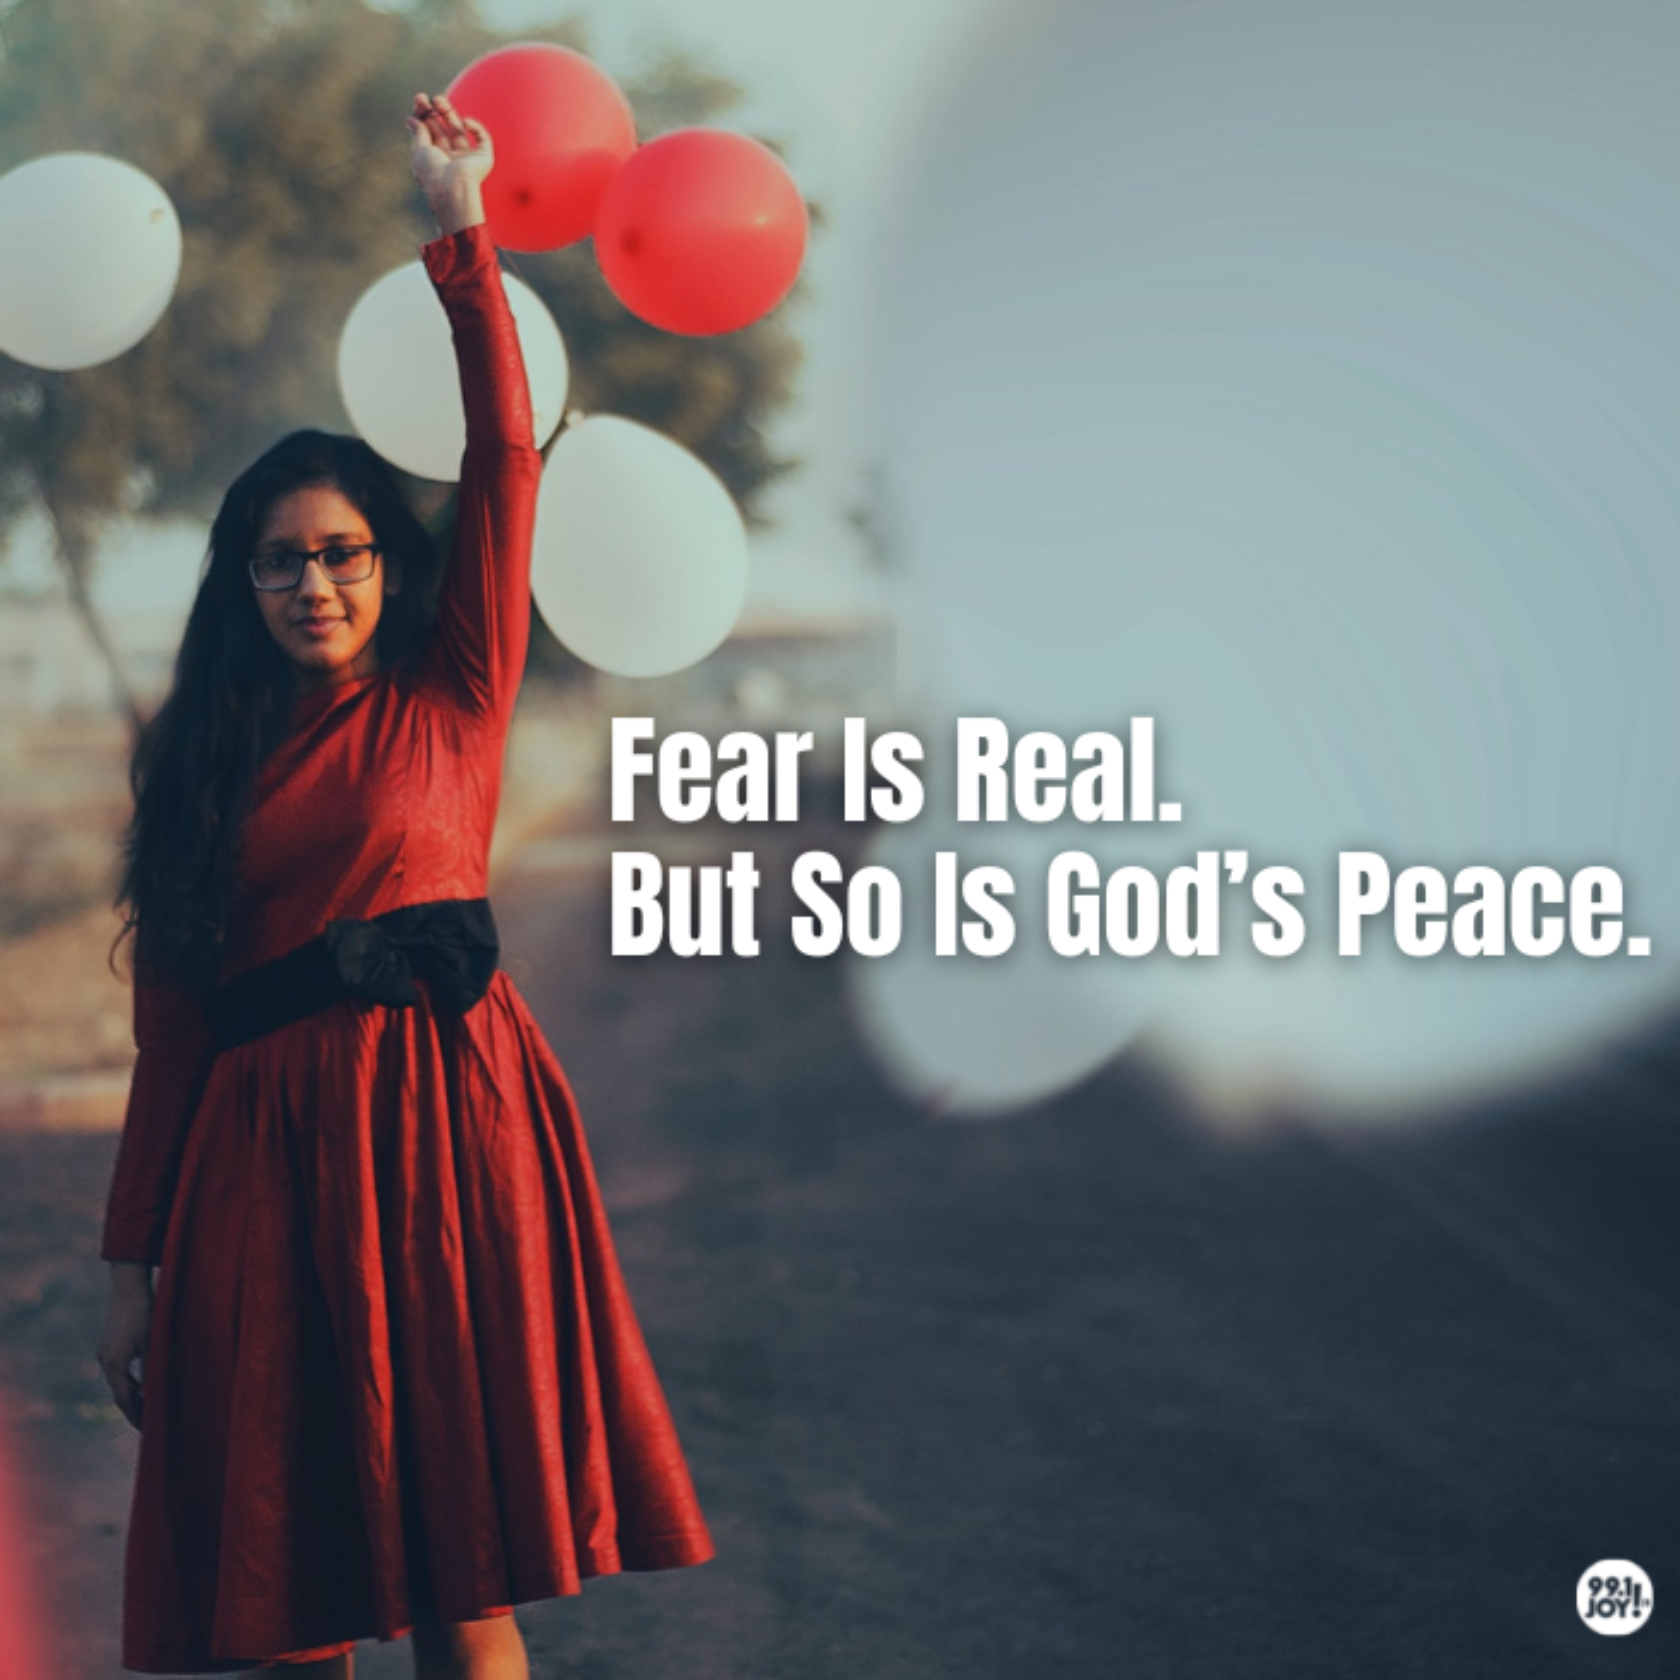 Fear Is Real. But So Is God’s Peace.